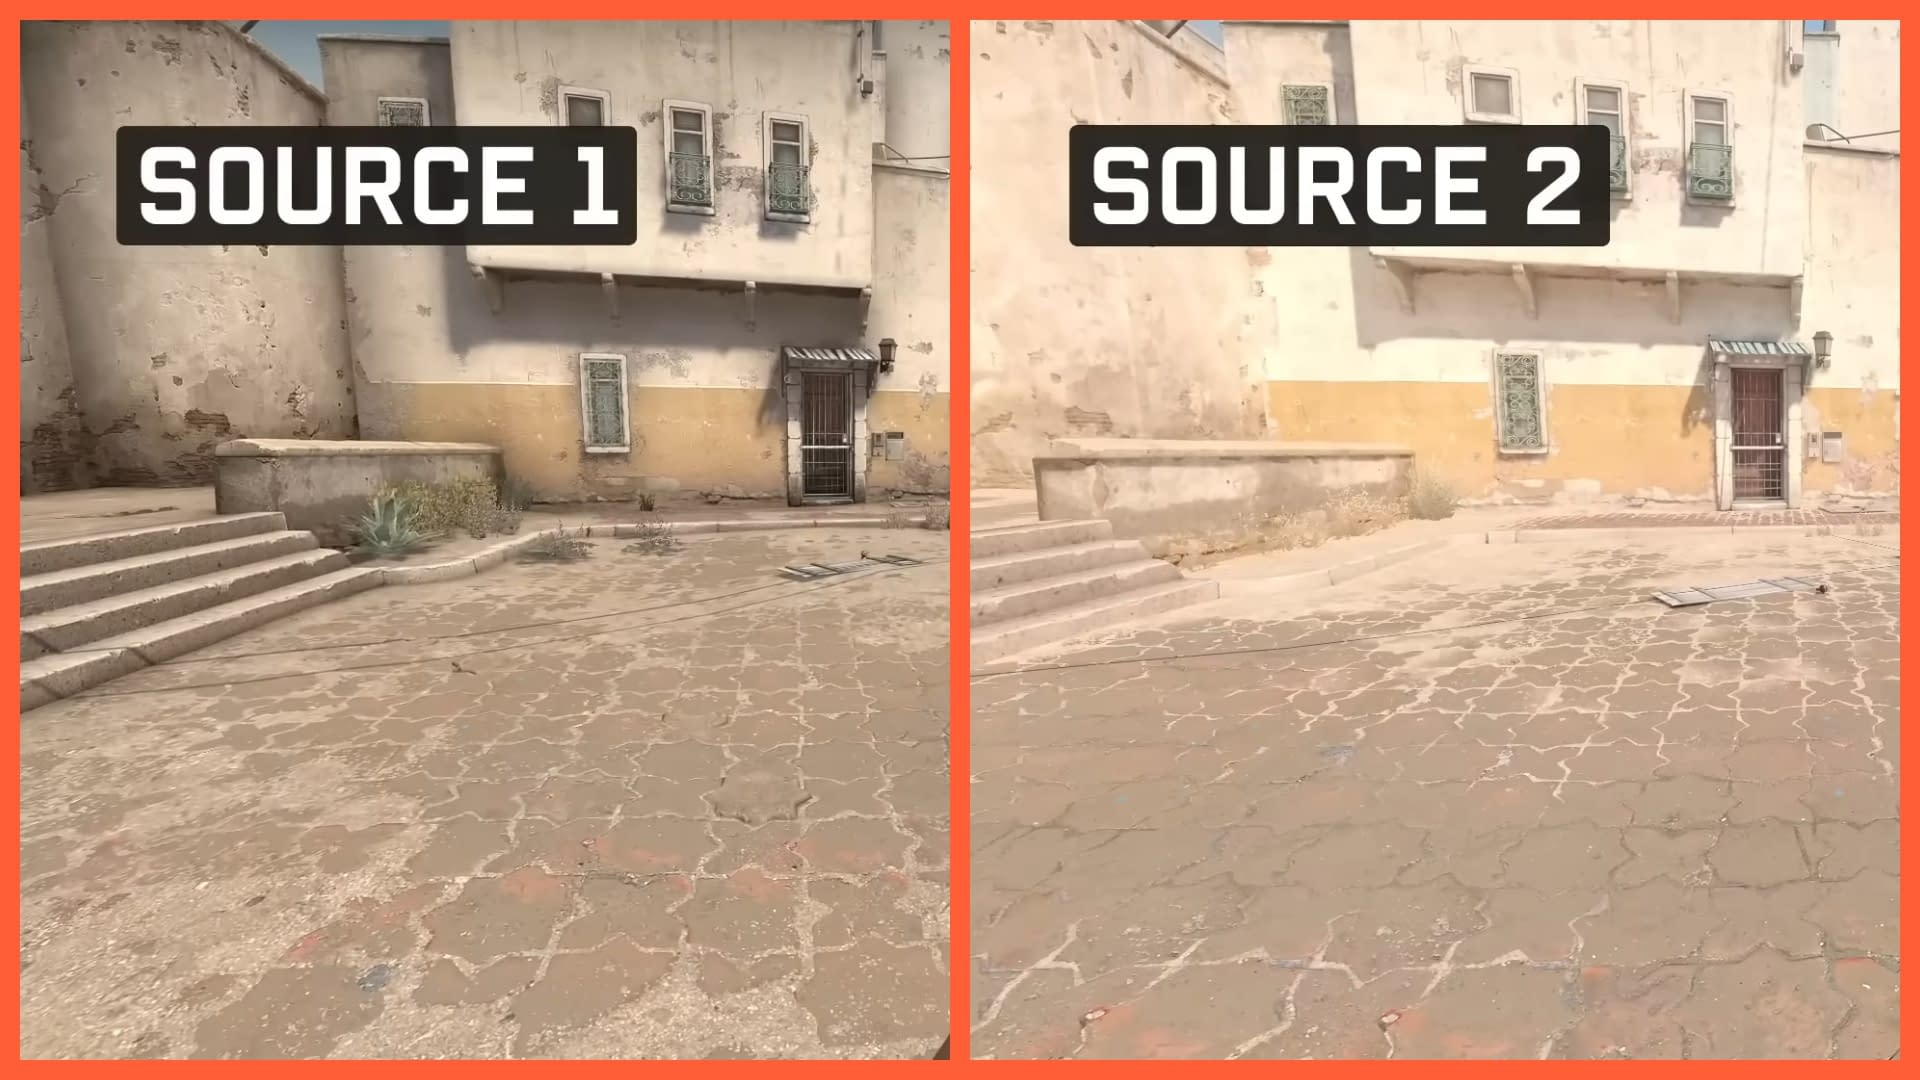 Surce for Counter- Counter, Surce 2 and UE comparison video released